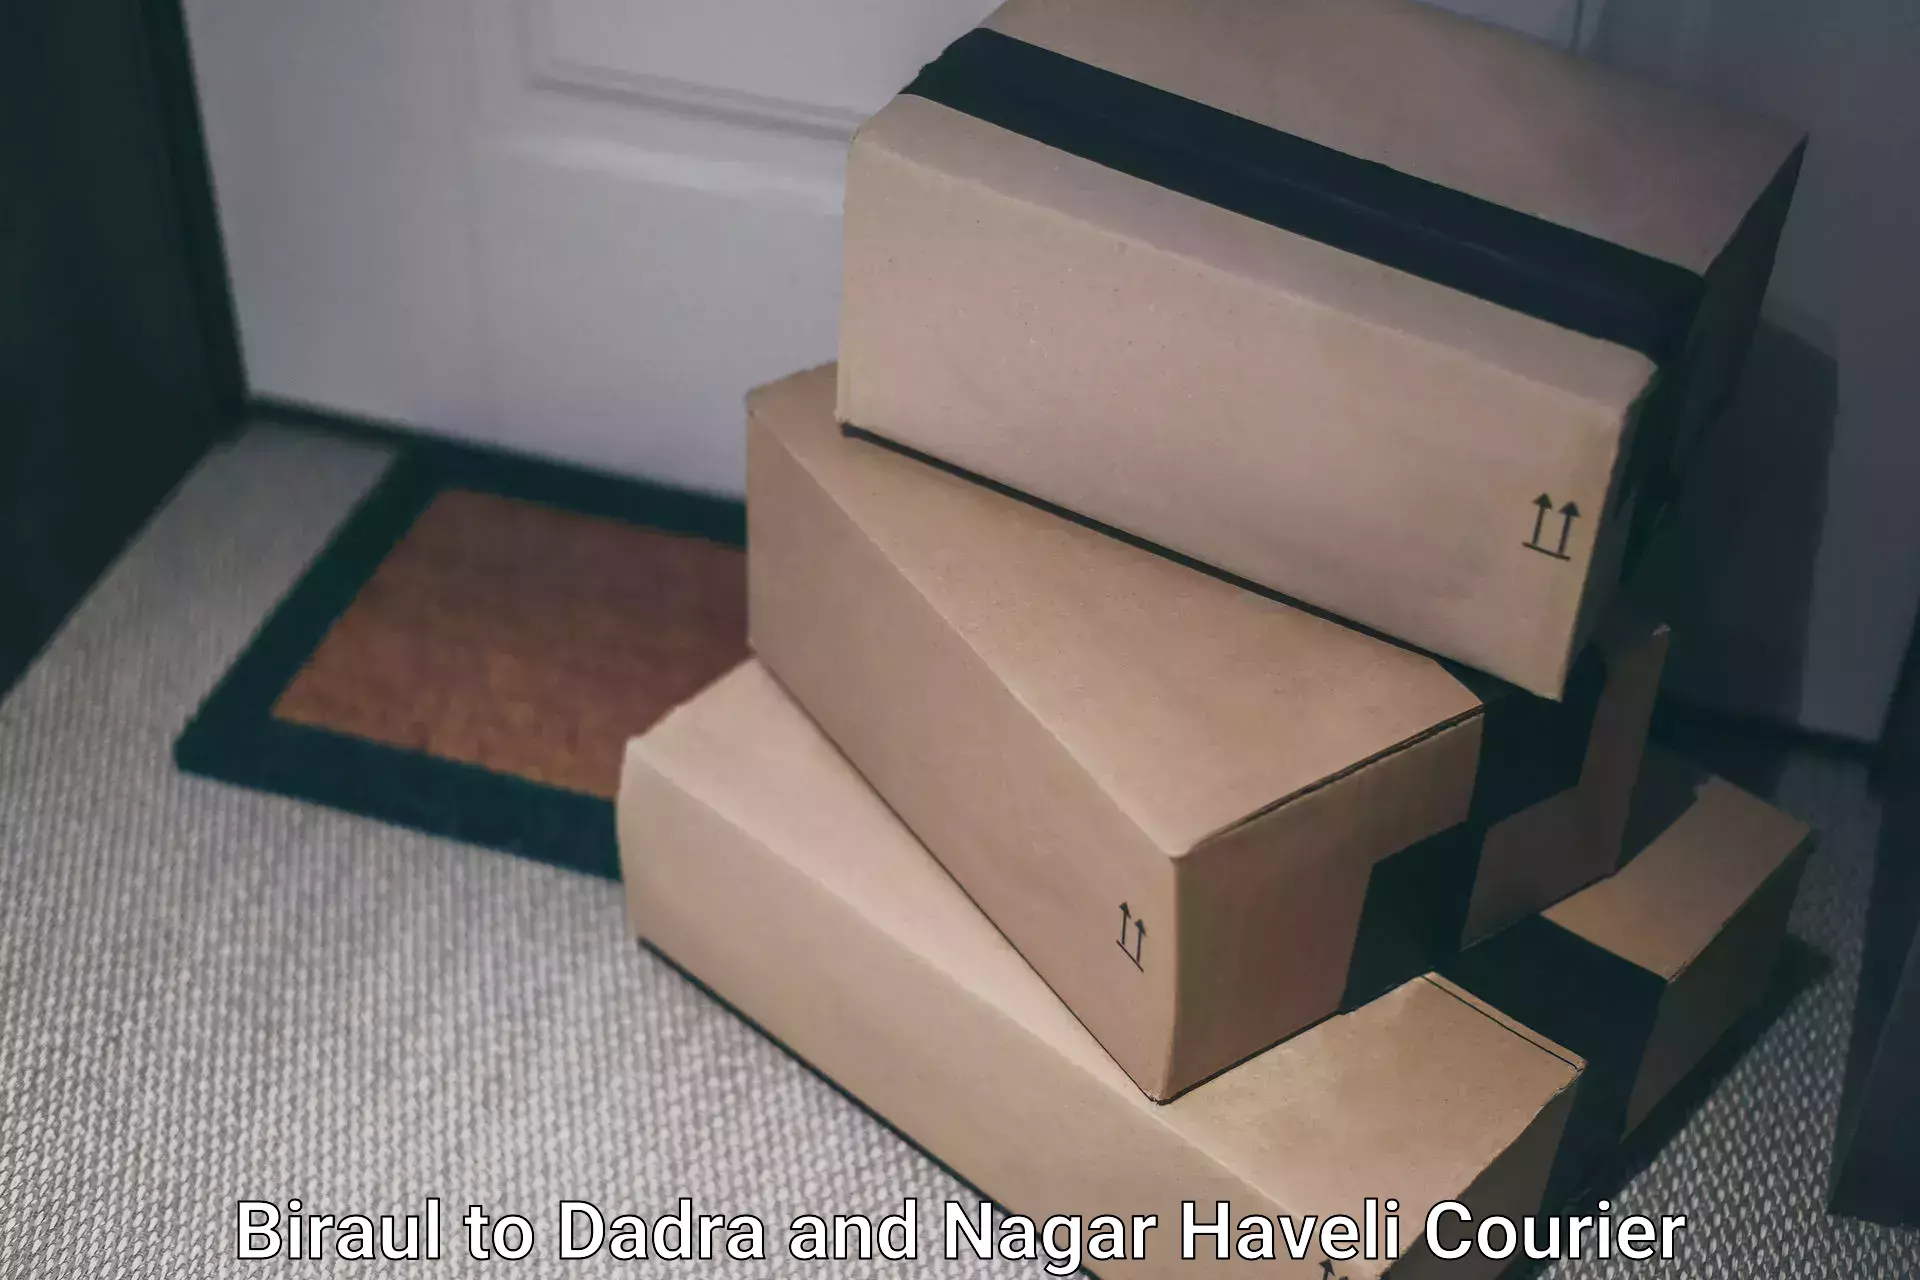 Parcel service for businesses Biraul to Dadra and Nagar Haveli